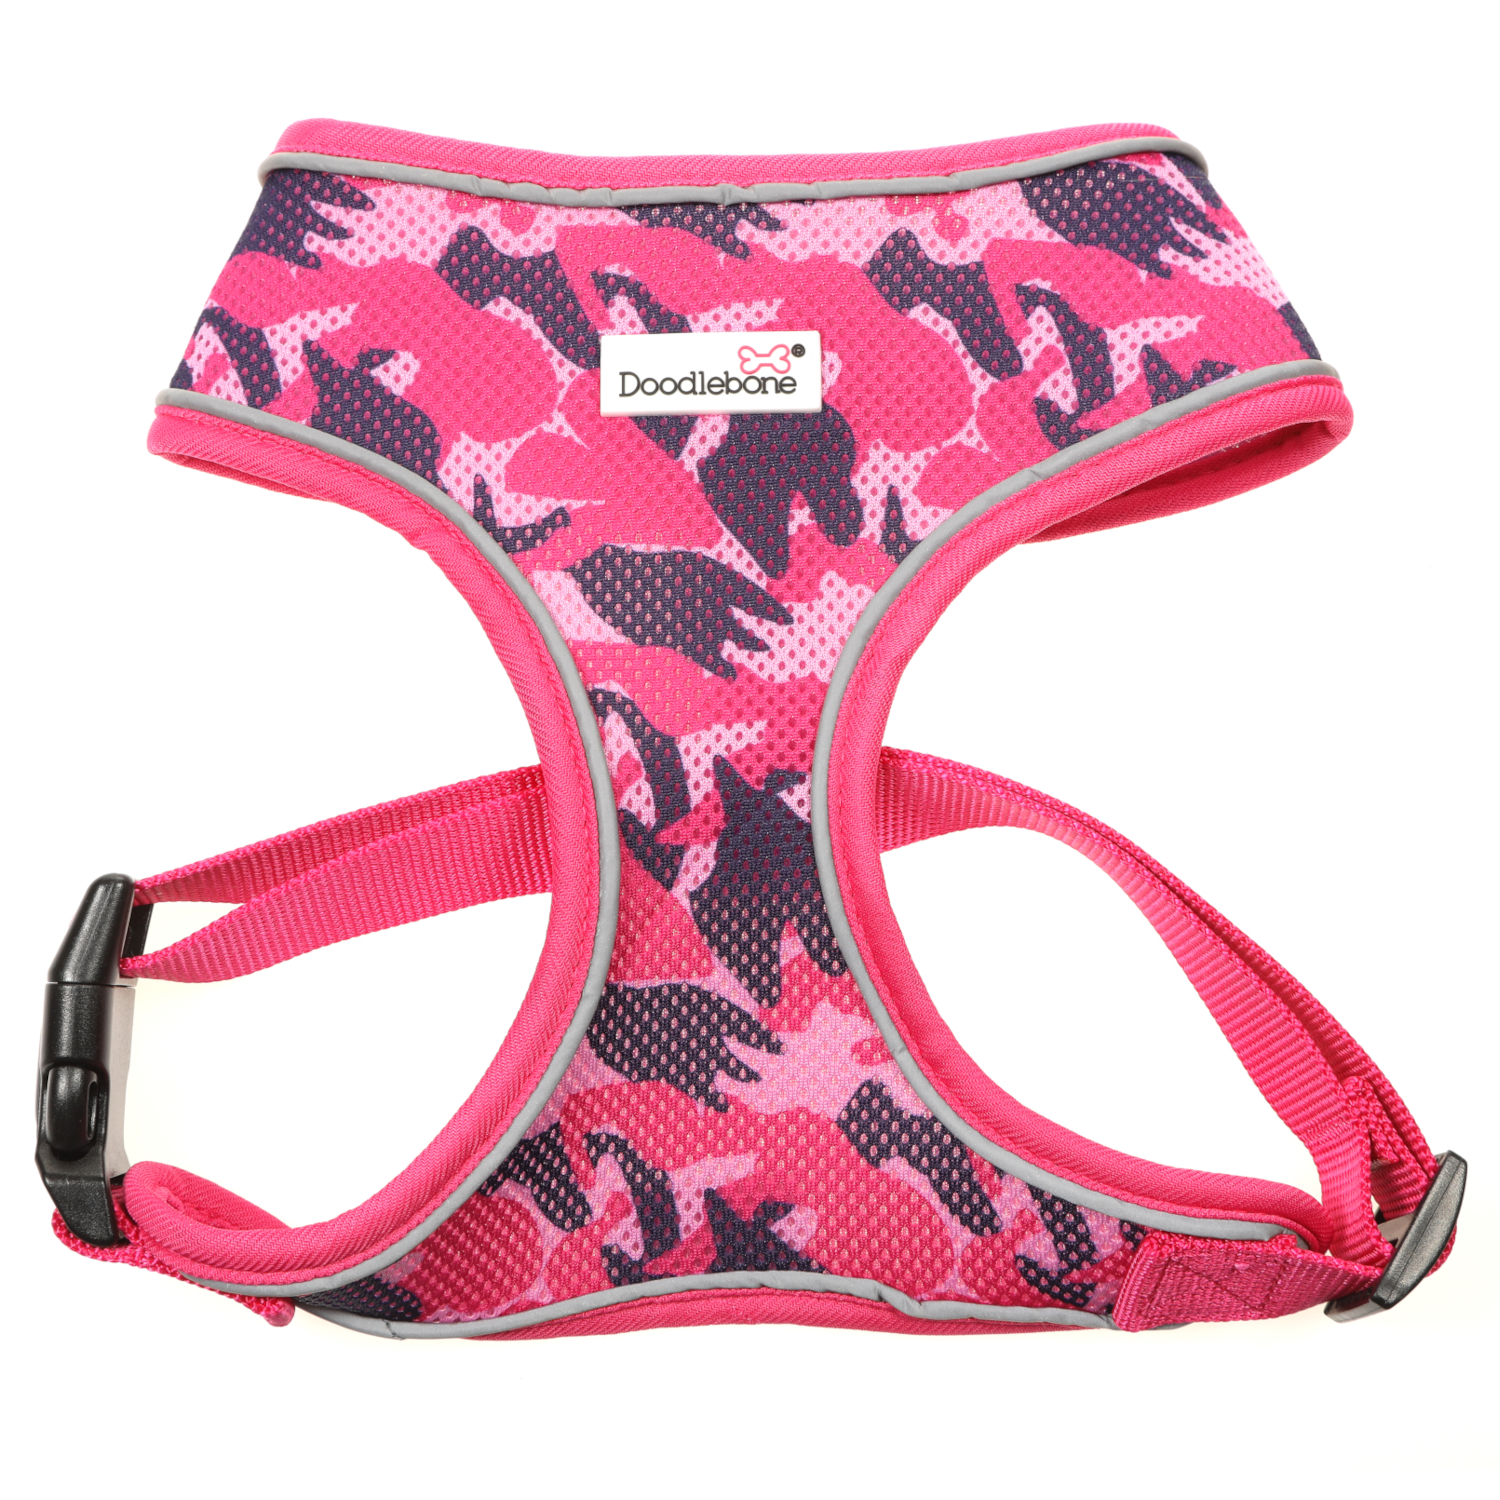 Doodlebone soft Padded Dog Puppy Air mesh harness choice of colours and sizes 